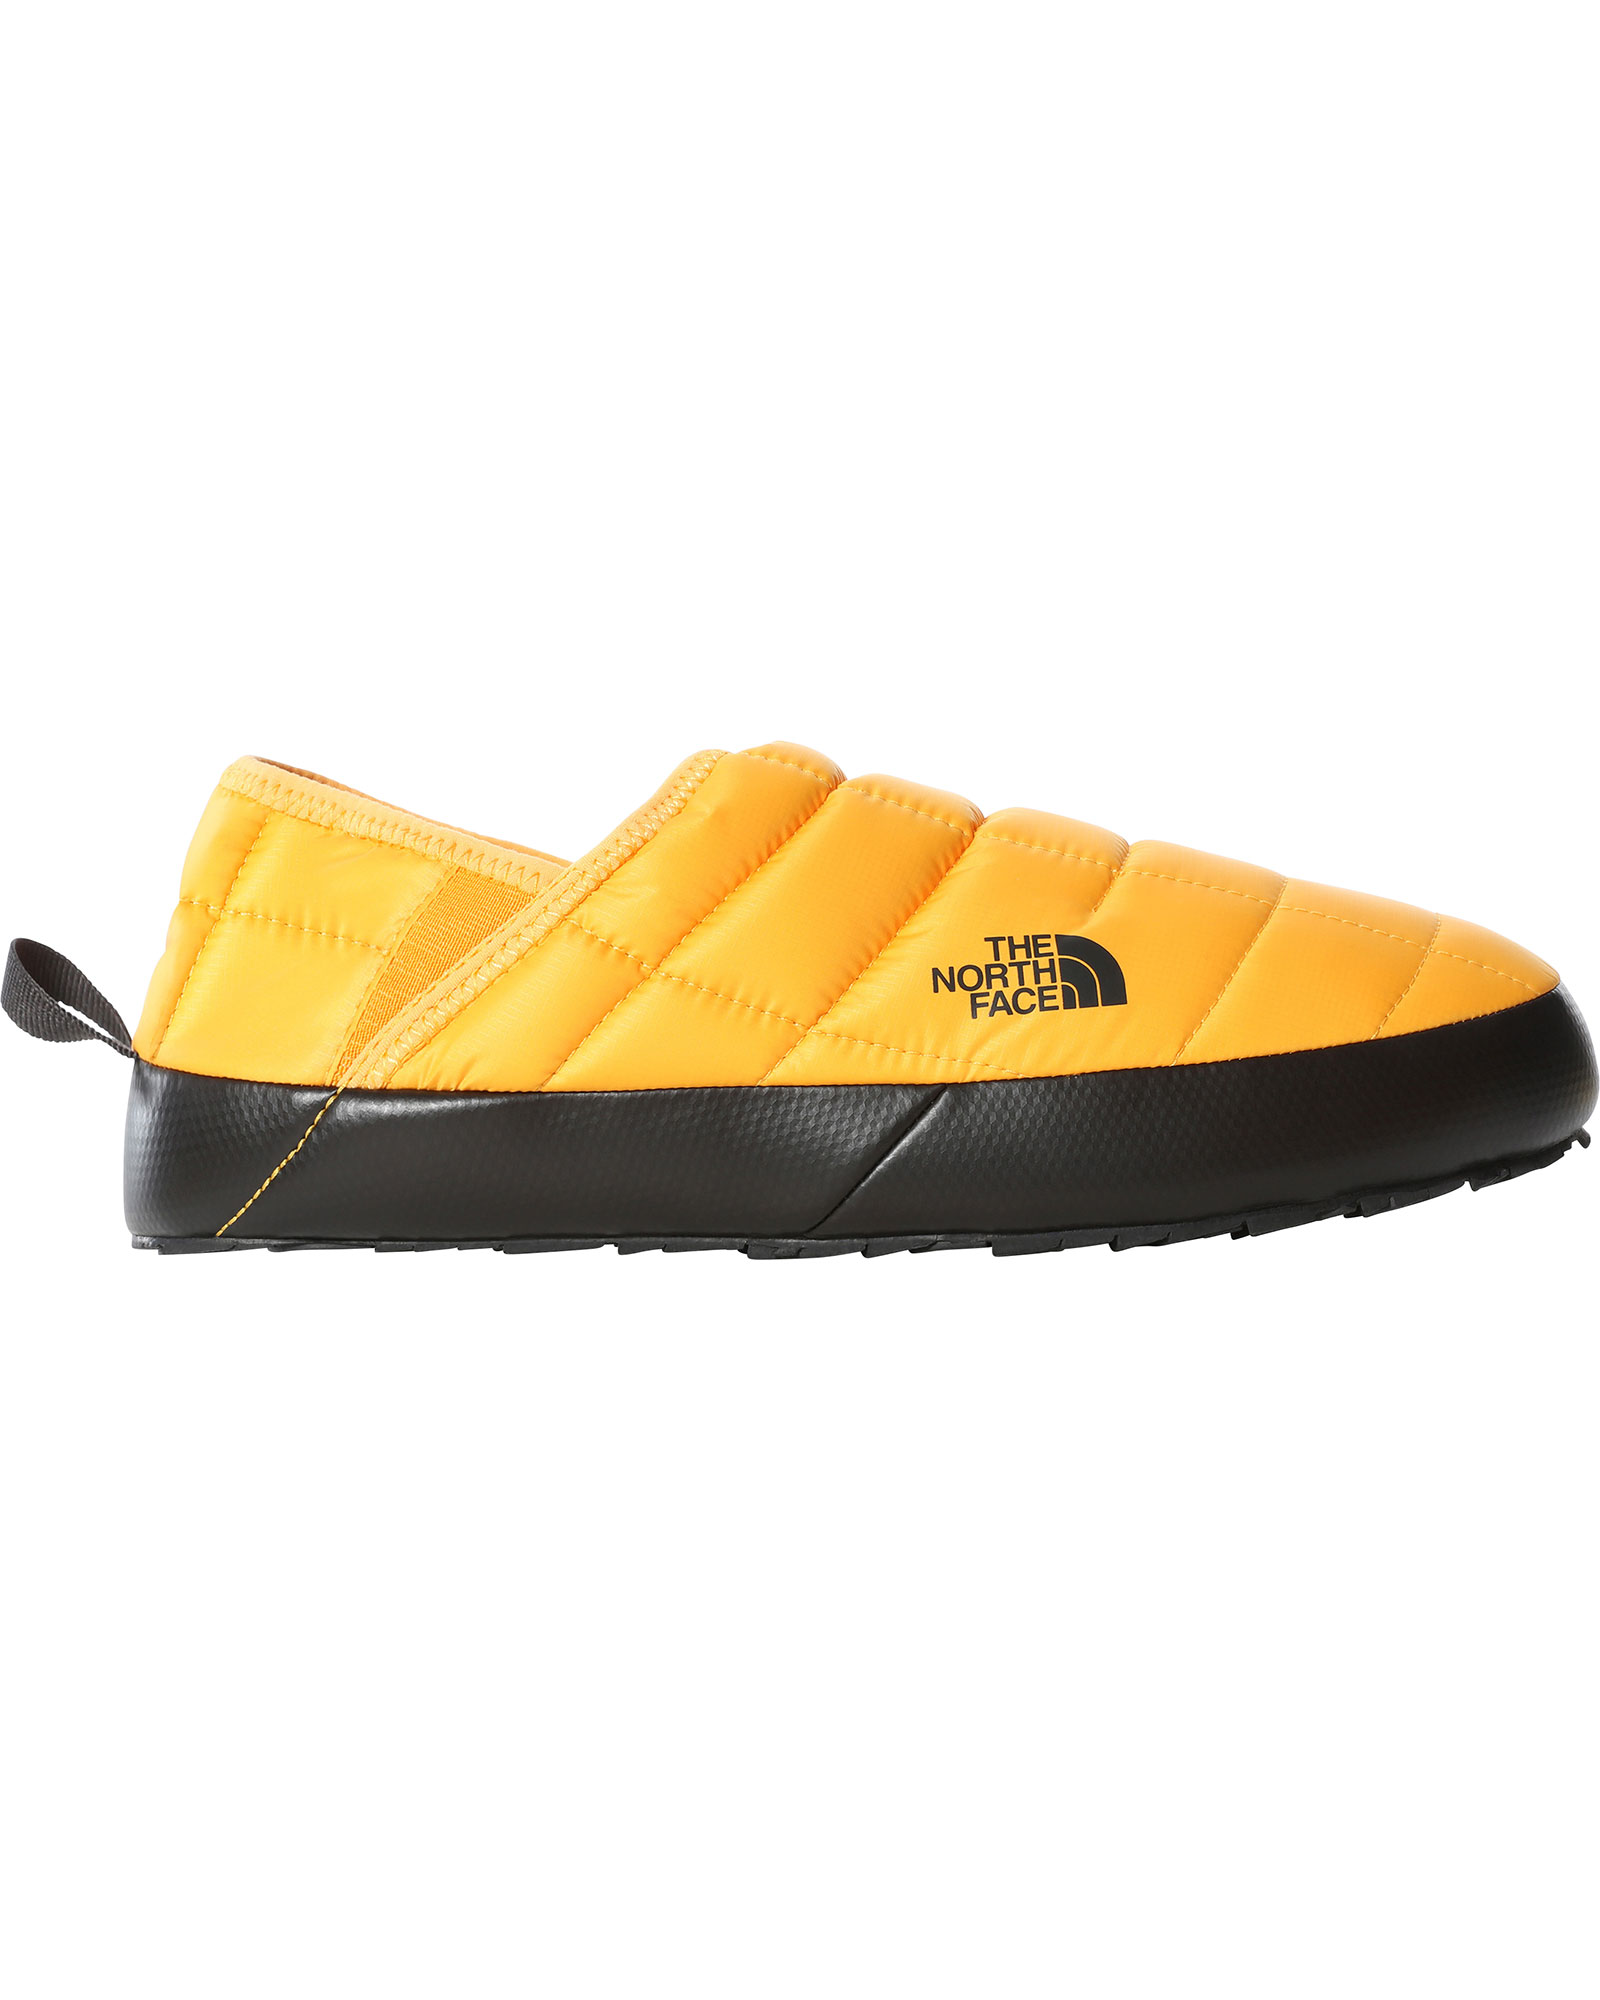 The North Face Men’s ThermoBall V Traction Mules - Summit Gold/TNF Black UK 8